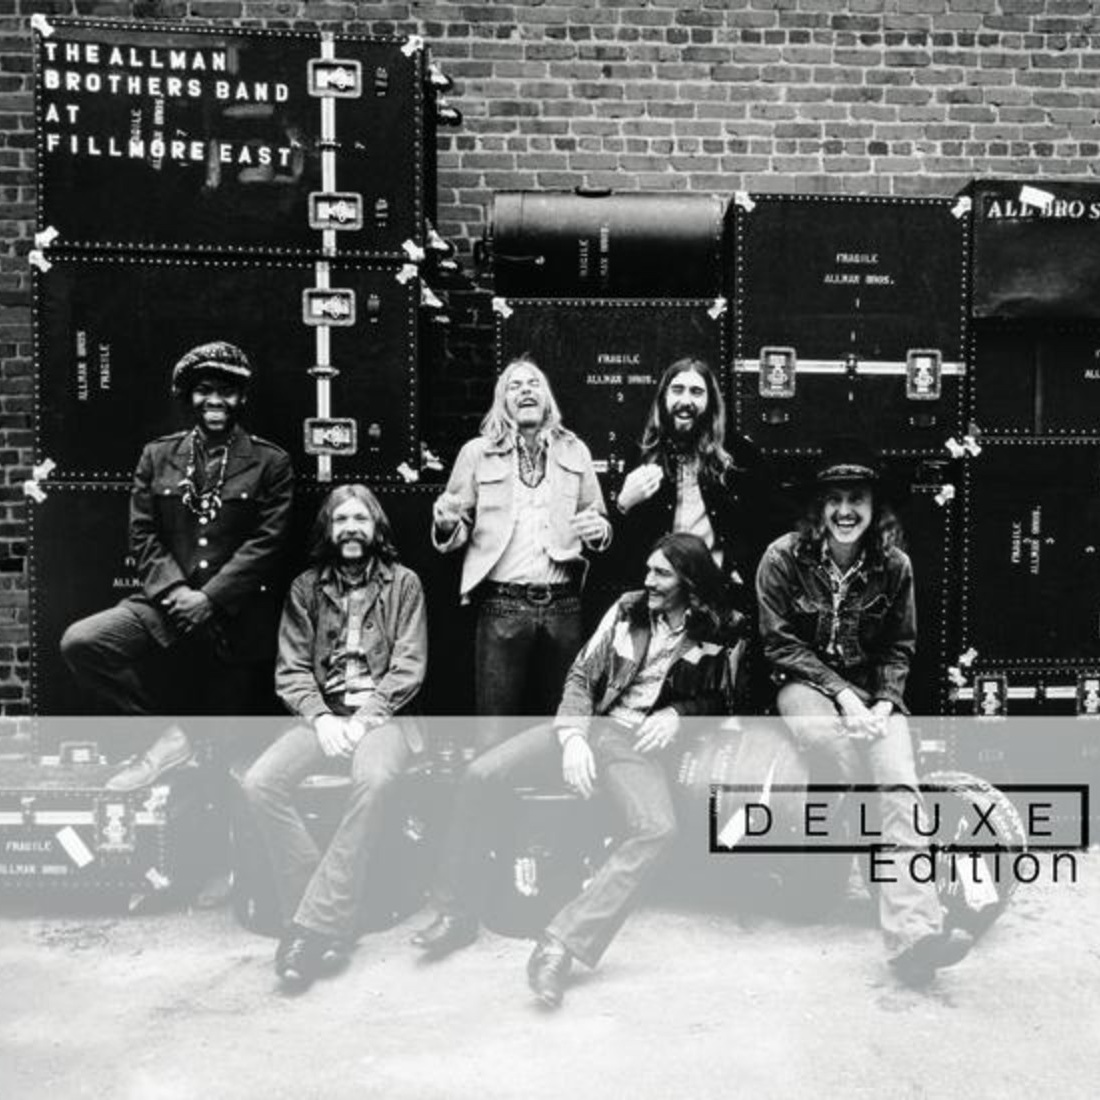 One Way Out (1971/Live At The Final Fillmore East Concert)